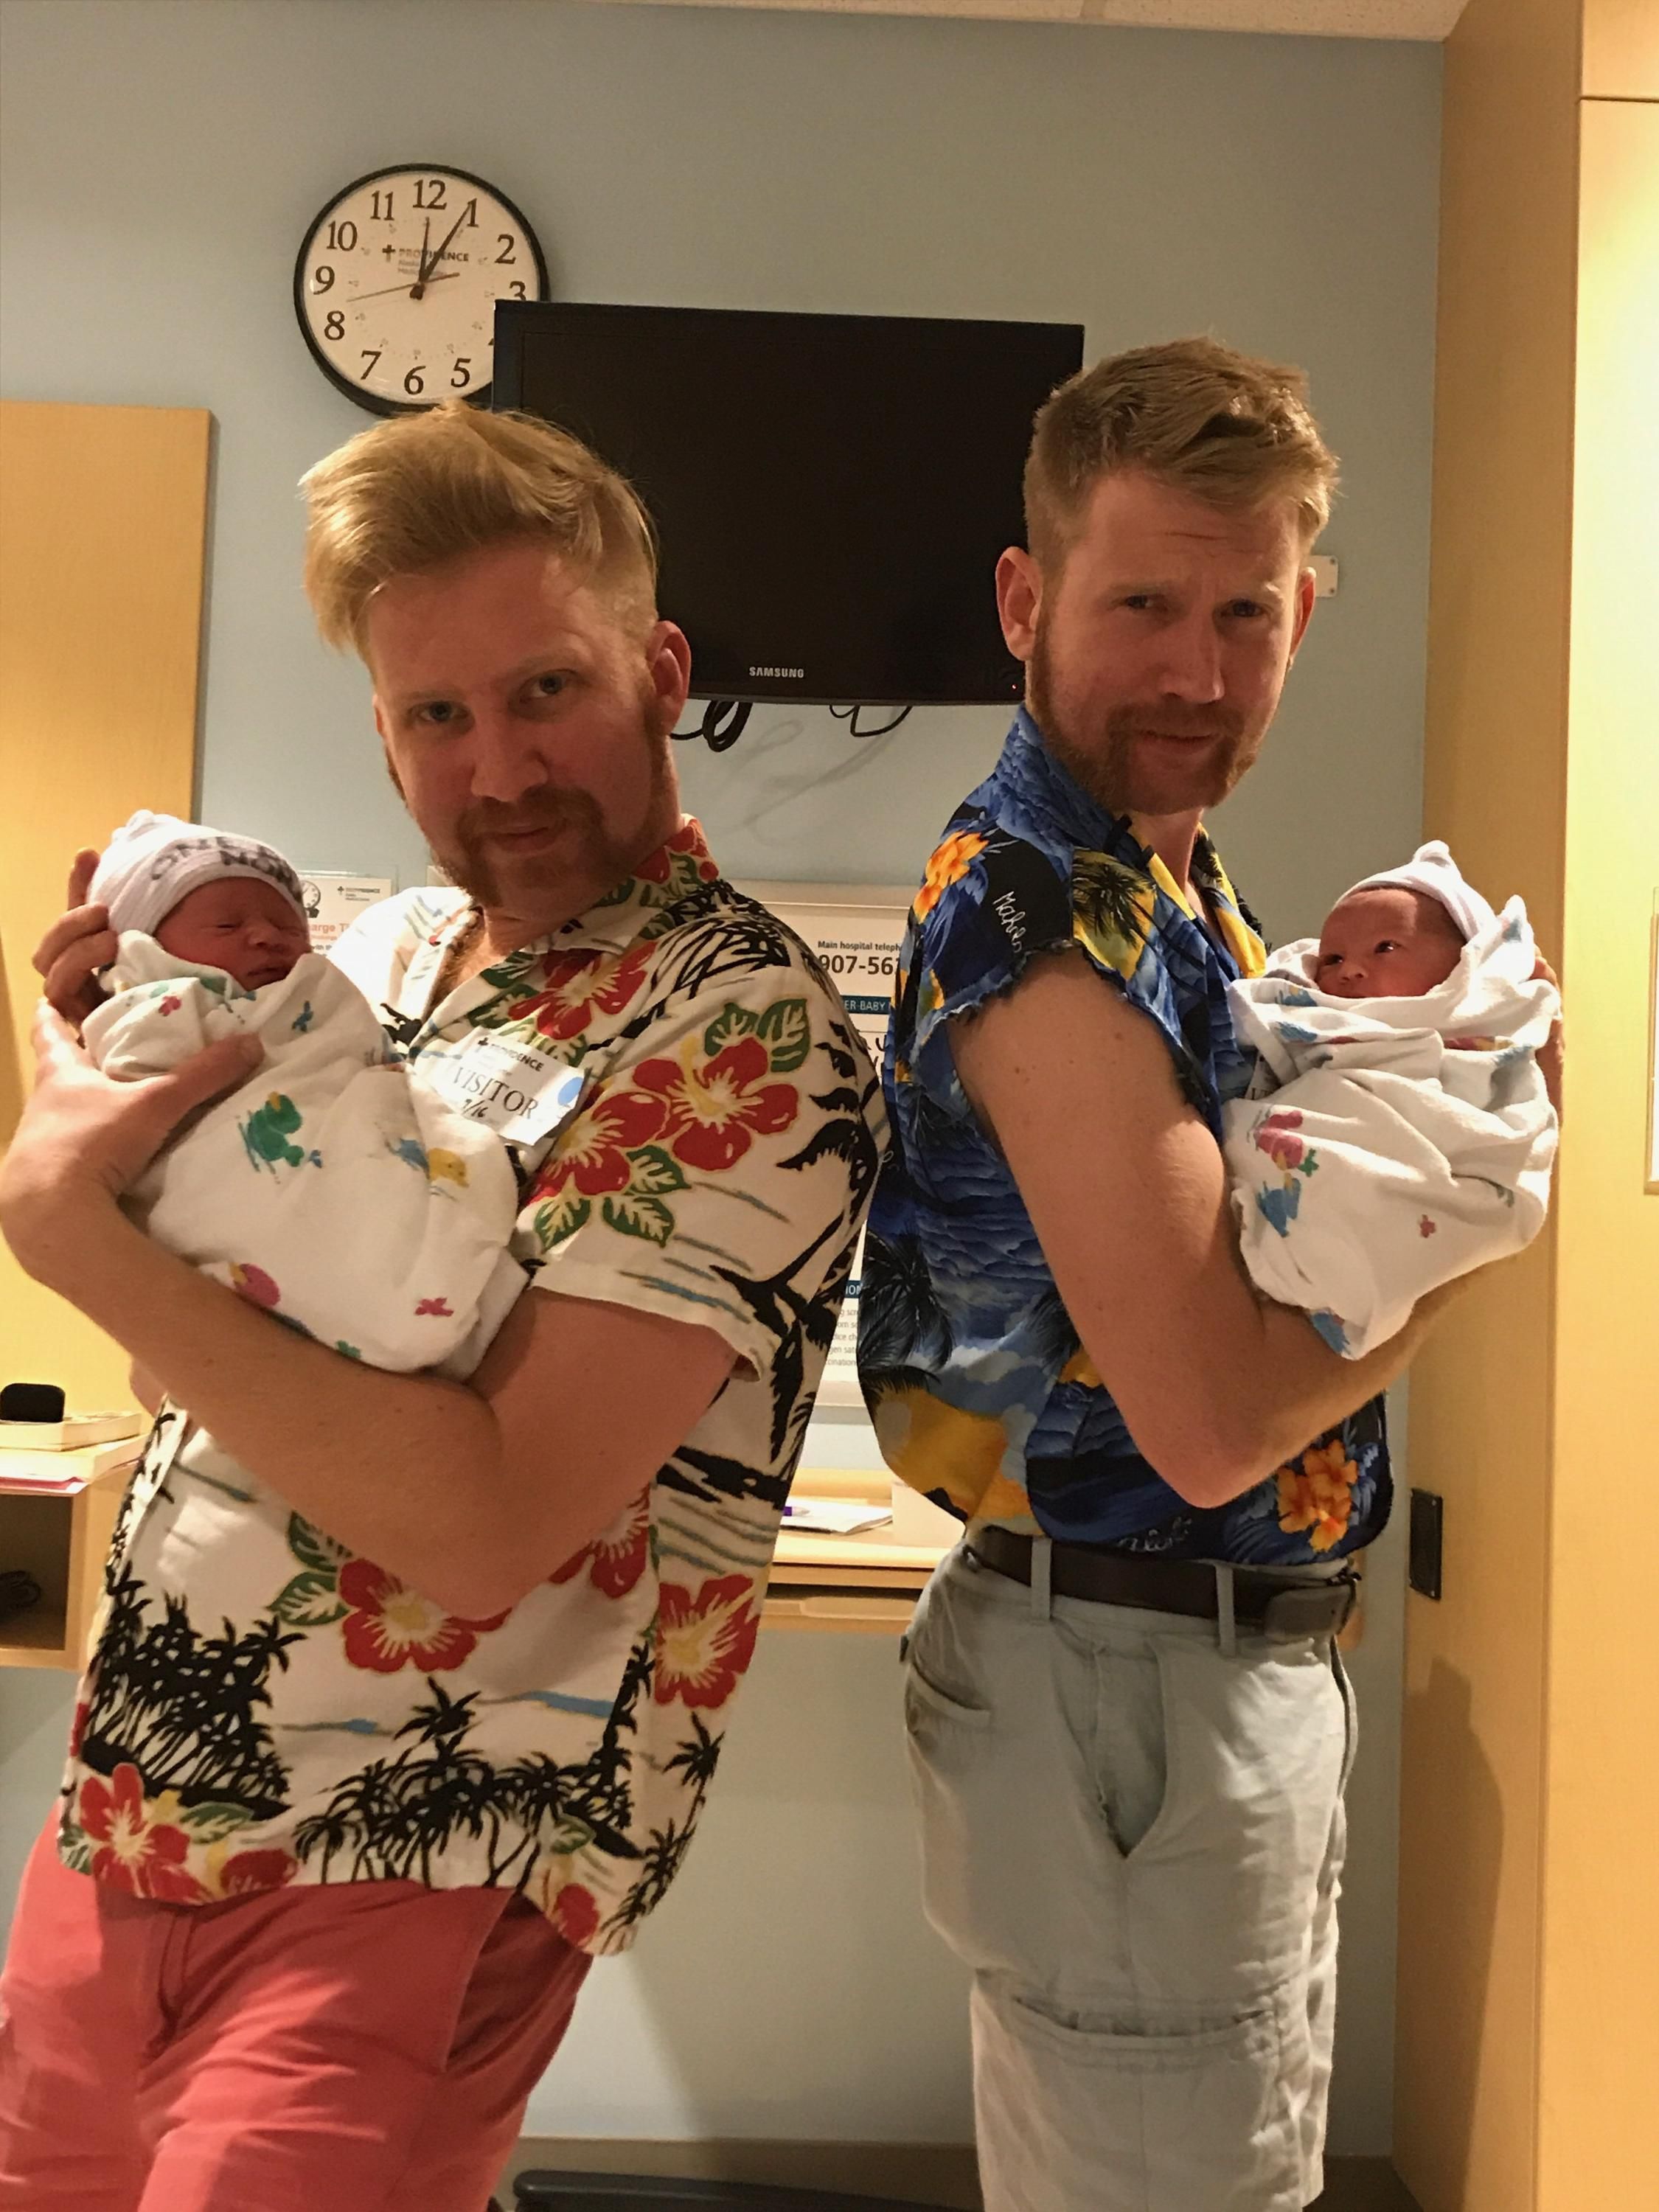 My brother and I became uncles this week to twins. First impressions are important, so naturally we shaved and dressed to impress